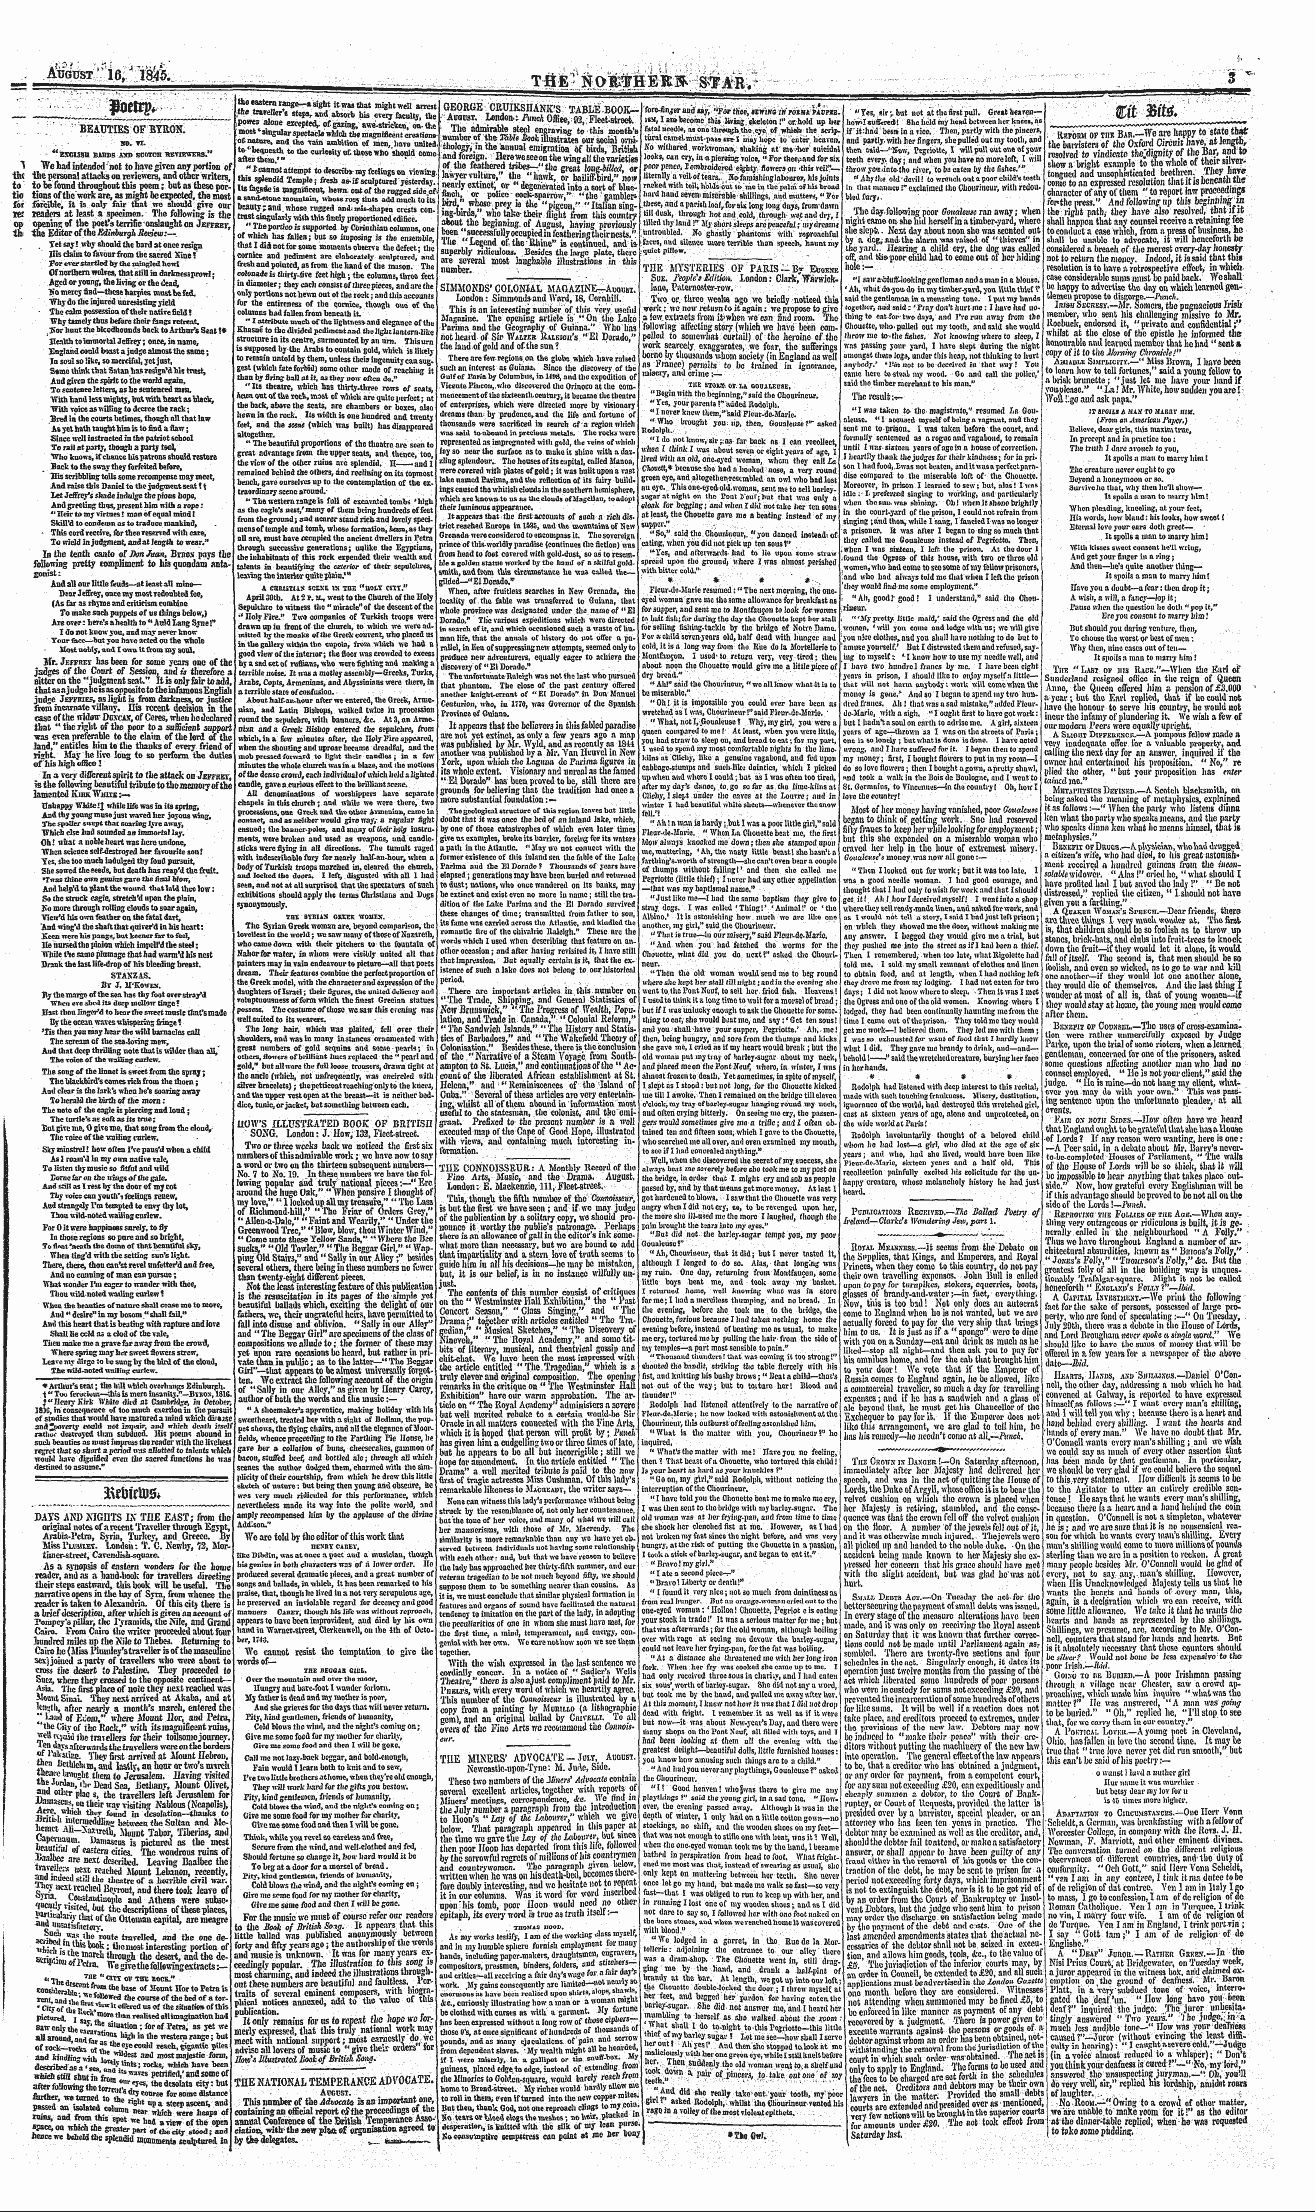 Northern Star (1837-1852): jS F Y, 3rd edition - The Miners' Advocate - July, August. New...